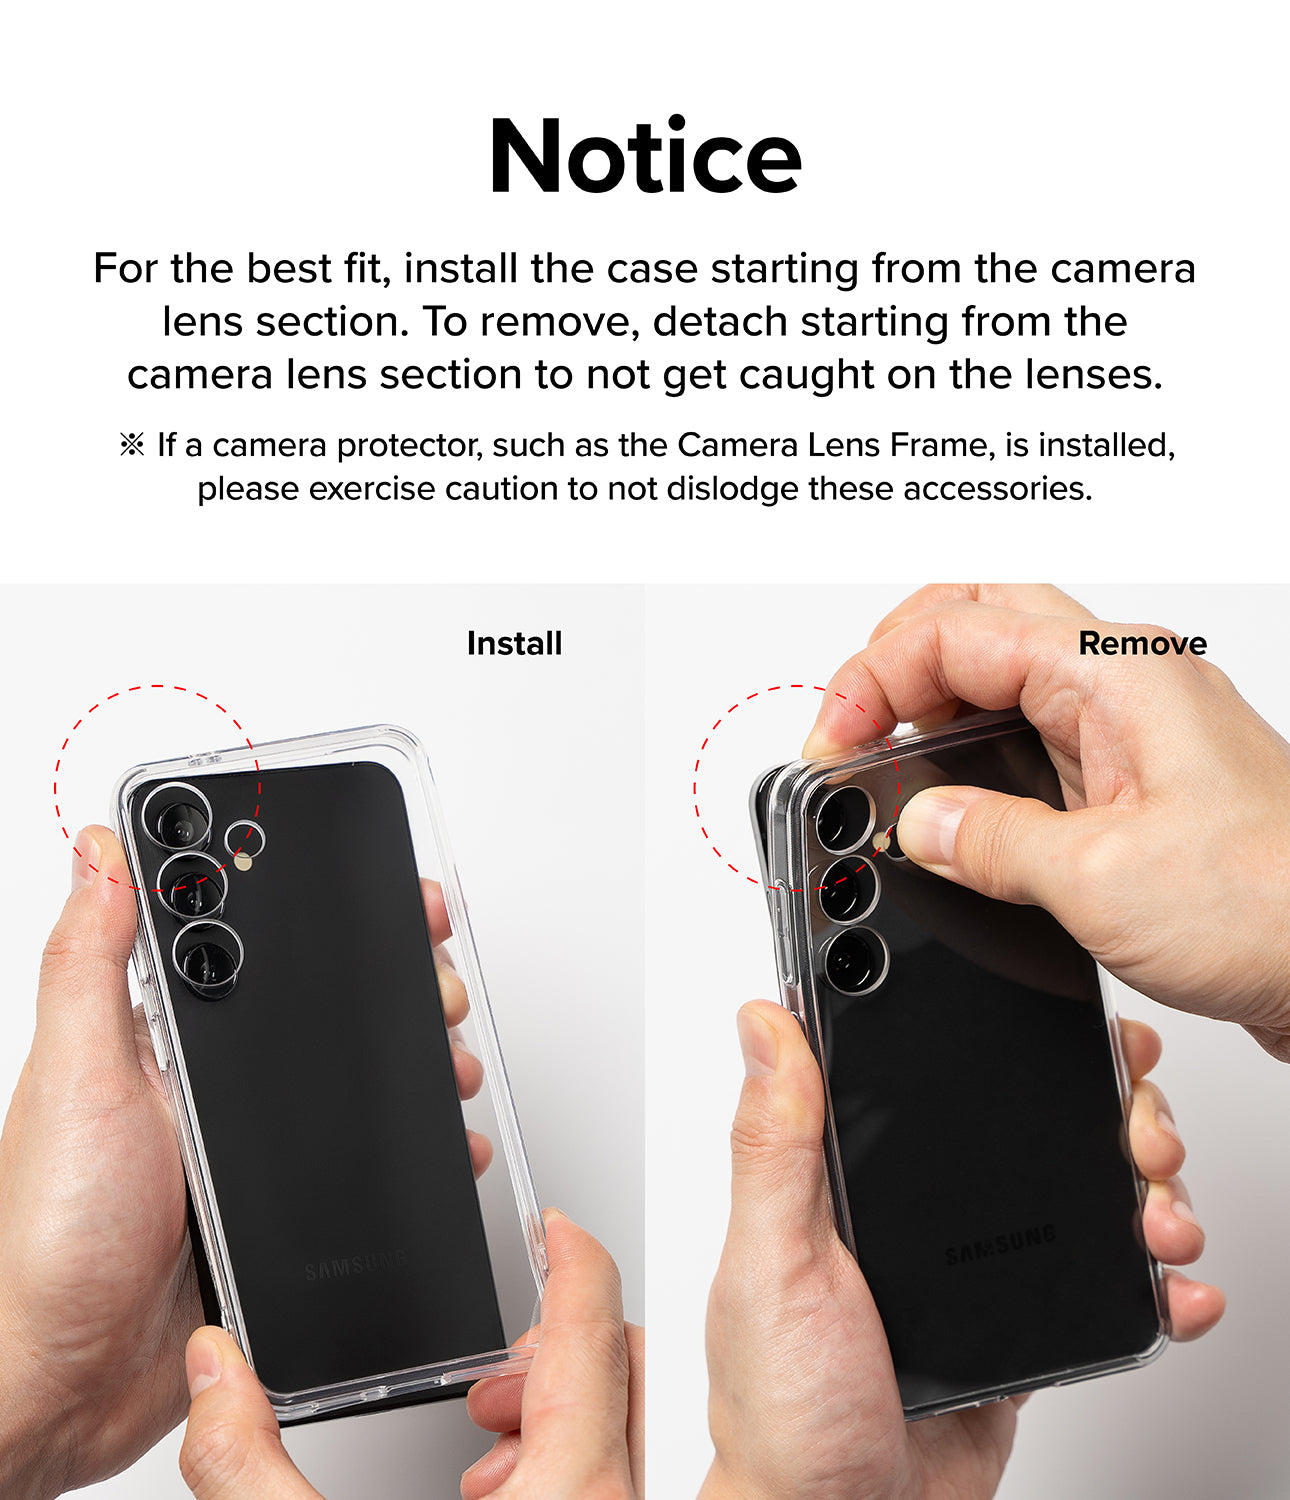 Galaxy S24 Case | Onyx - Dark Green - Notice. For the best fit, install the case starting from the camera lens section. To remove, detach starting from the camera lens section to not get caught on the lenses.